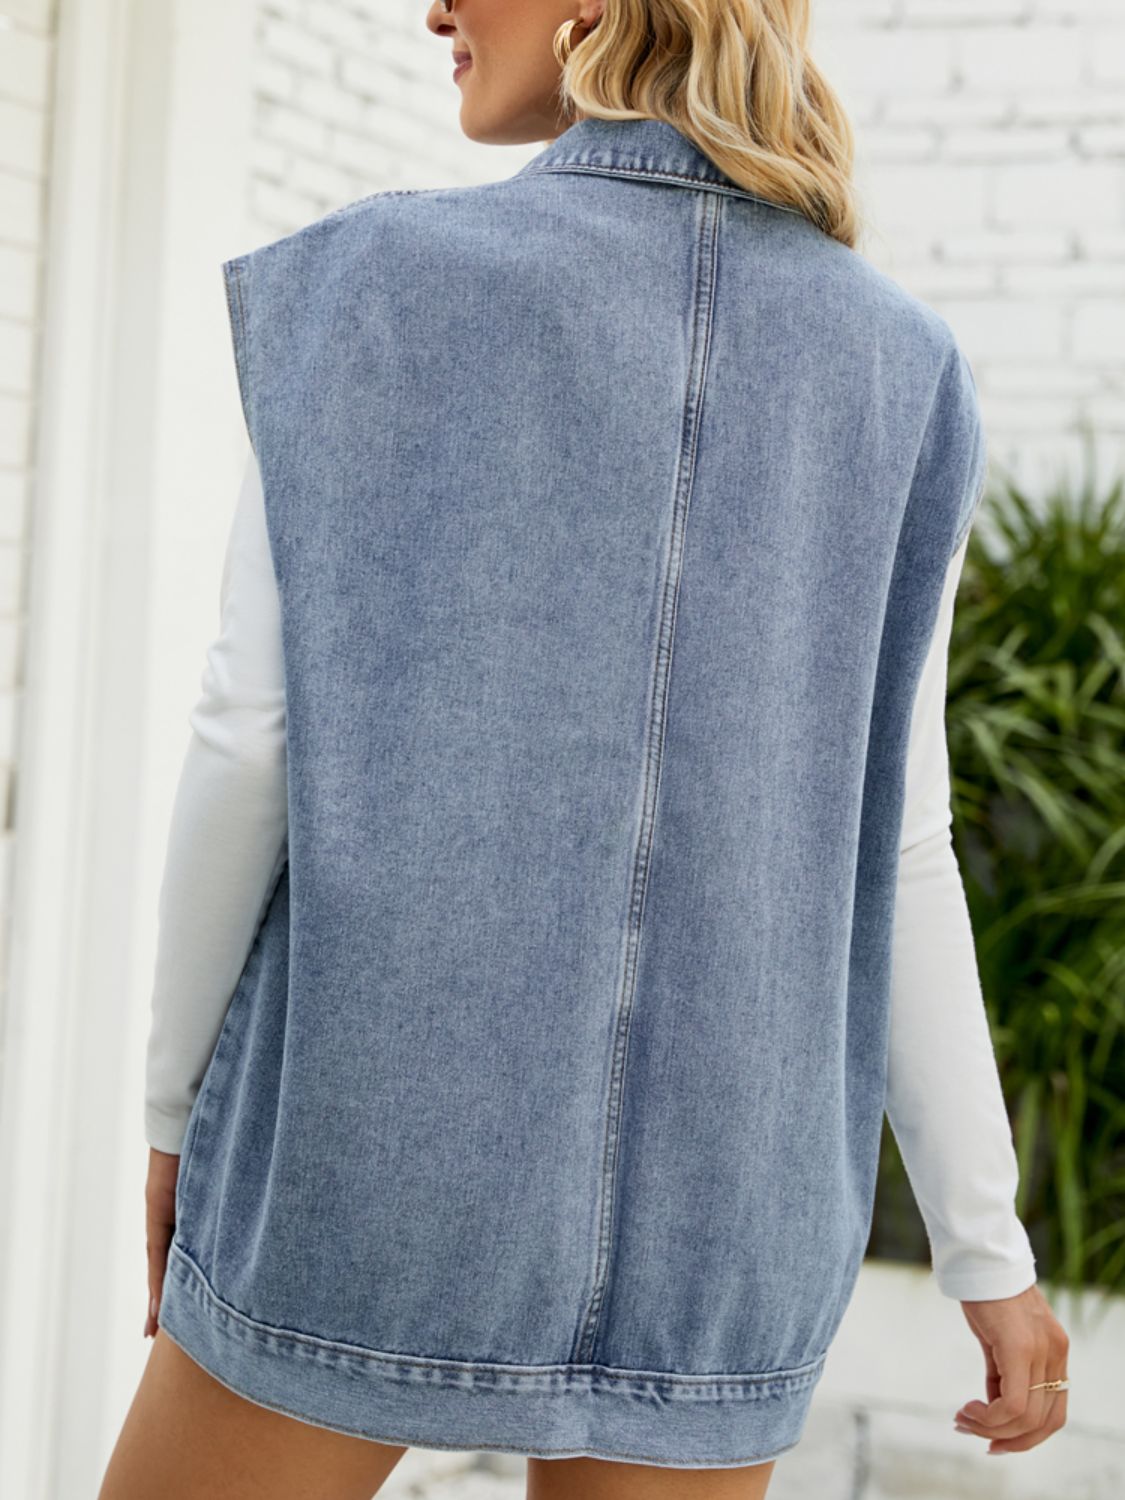 Light Slate Gray Collared Neck Sleeveless Denim Top with Pockets Sentient Beauty Fashions Apparel & Accessories